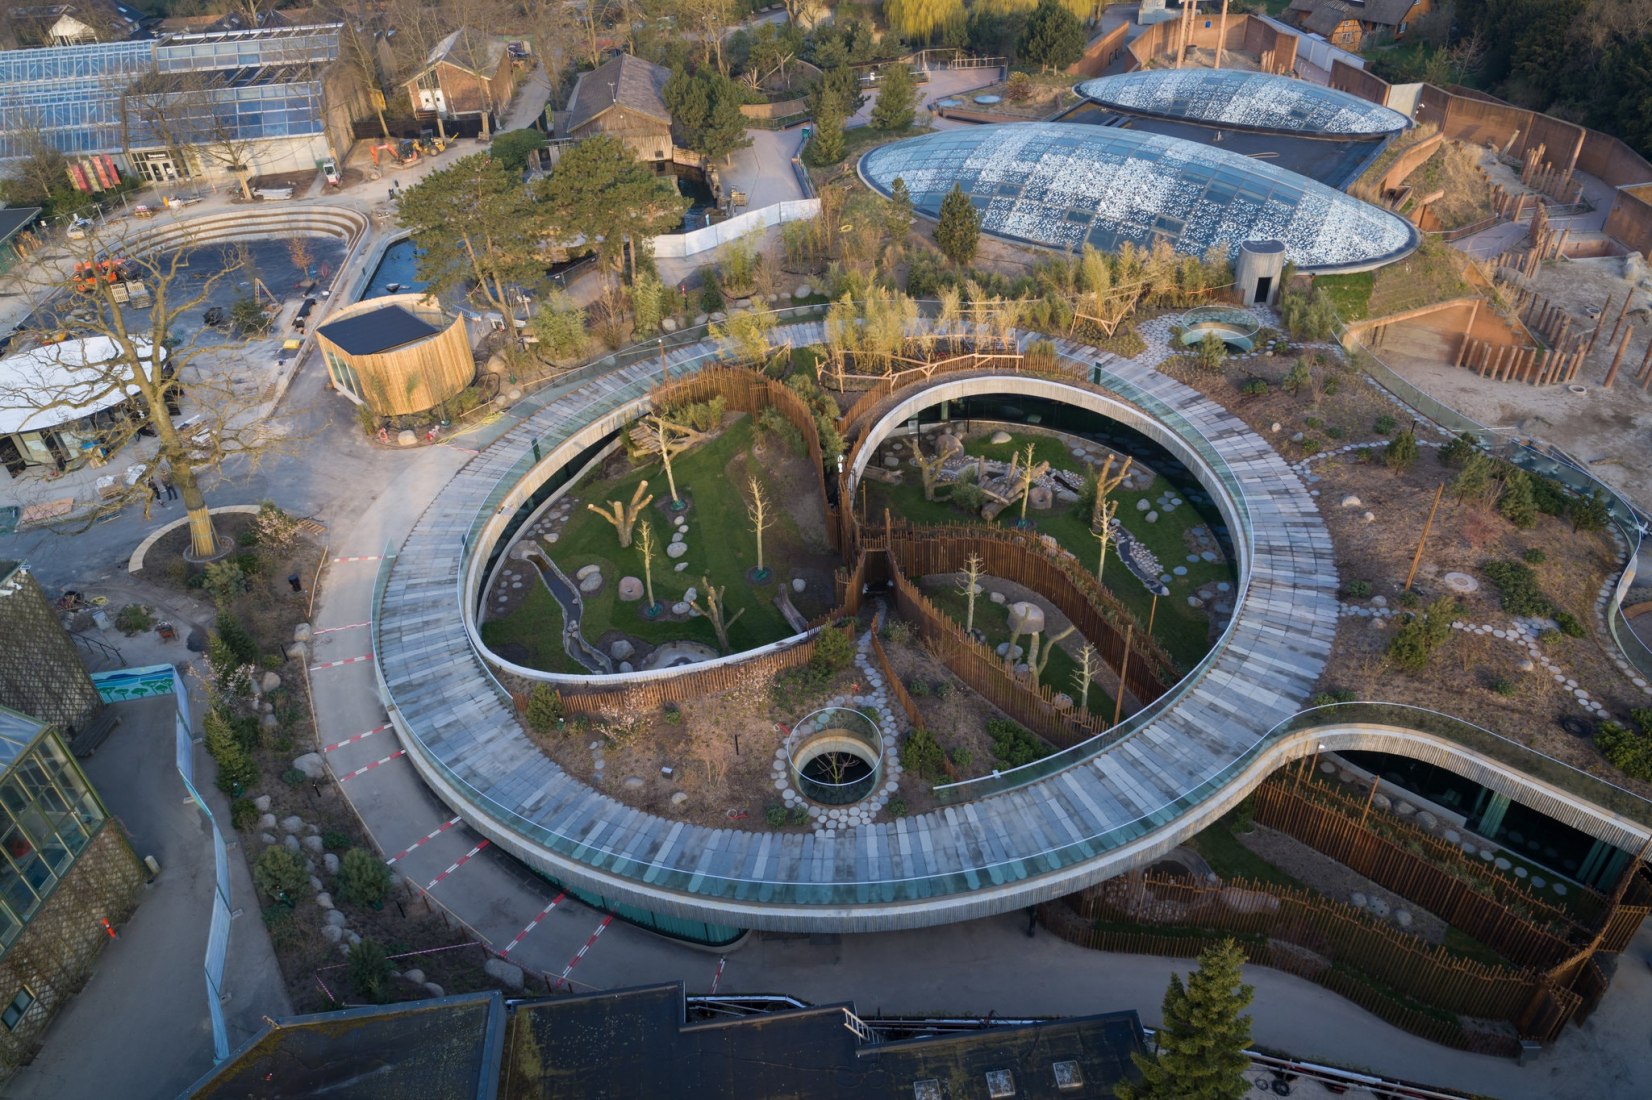 The panda house is shaped like the Chinese yin and yang symbol, which represents opposites in balances. Photograph by Frank Ronsholt/Copenhagen Zoo